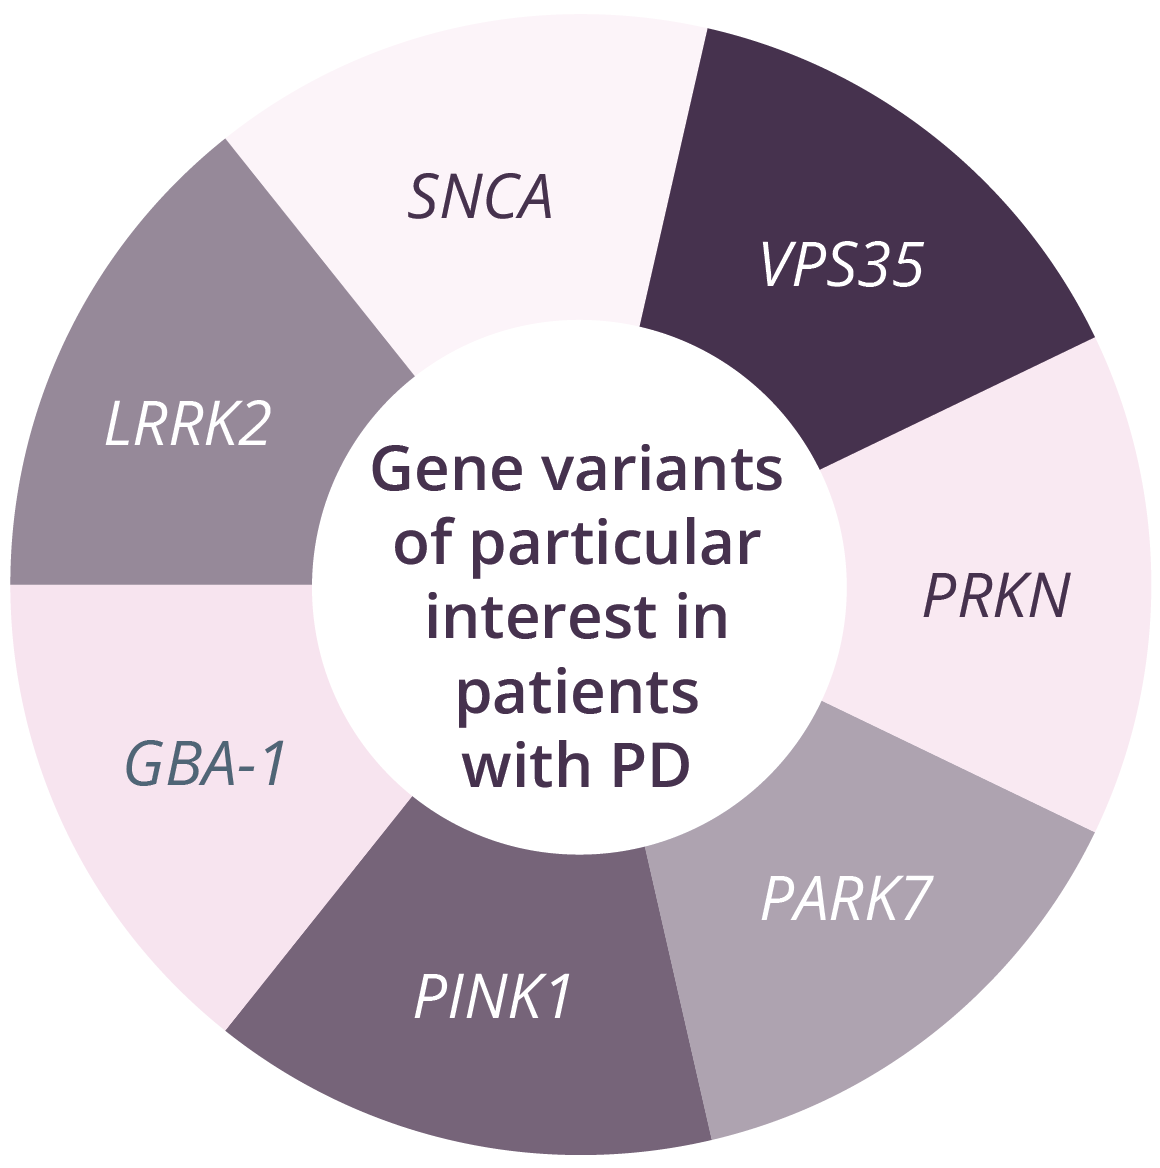 Seven gene variants of particular interest in patients with PD, including SNCA, VPS35, and PRKN.